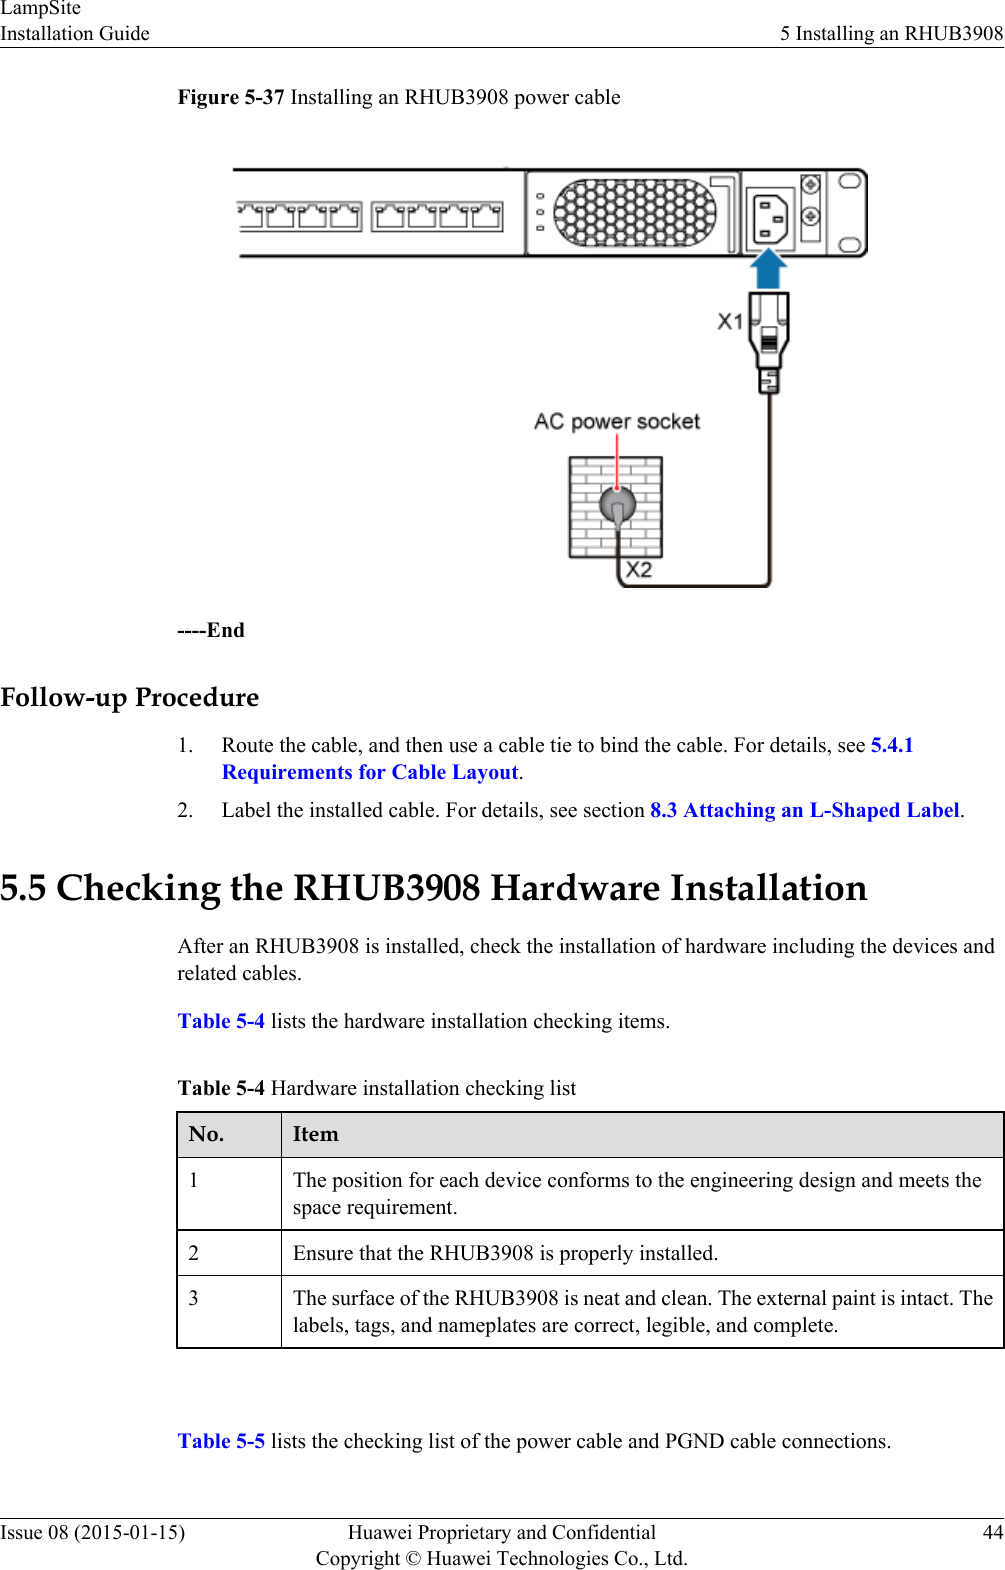 Figure 5-37 Installing an RHUB3908 power cable----EndFollow-up Procedure1. Route the cable, and then use a cable tie to bind the cable. For details, see 5.4.1Requirements for Cable Layout.2. Label the installed cable. For details, see section 8.3 Attaching an L-Shaped Label.5.5 Checking the RHUB3908 Hardware InstallationAfter an RHUB3908 is installed, check the installation of hardware including the devices andrelated cables.Table 5-4 lists the hardware installation checking items.Table 5-4 Hardware installation checking listNo. Item1The position for each device conforms to the engineering design and meets thespace requirement.2 Ensure that the RHUB3908 is properly installed.3 The surface of the RHUB3908 is neat and clean. The external paint is intact. Thelabels, tags, and nameplates are correct, legible, and complete. Table 5-5 lists the checking list of the power cable and PGND cable connections.LampSiteInstallation Guide 5 Installing an RHUB3908Issue 08 (2015-01-15) Huawei Proprietary and ConfidentialCopyright © Huawei Technologies Co., Ltd.44